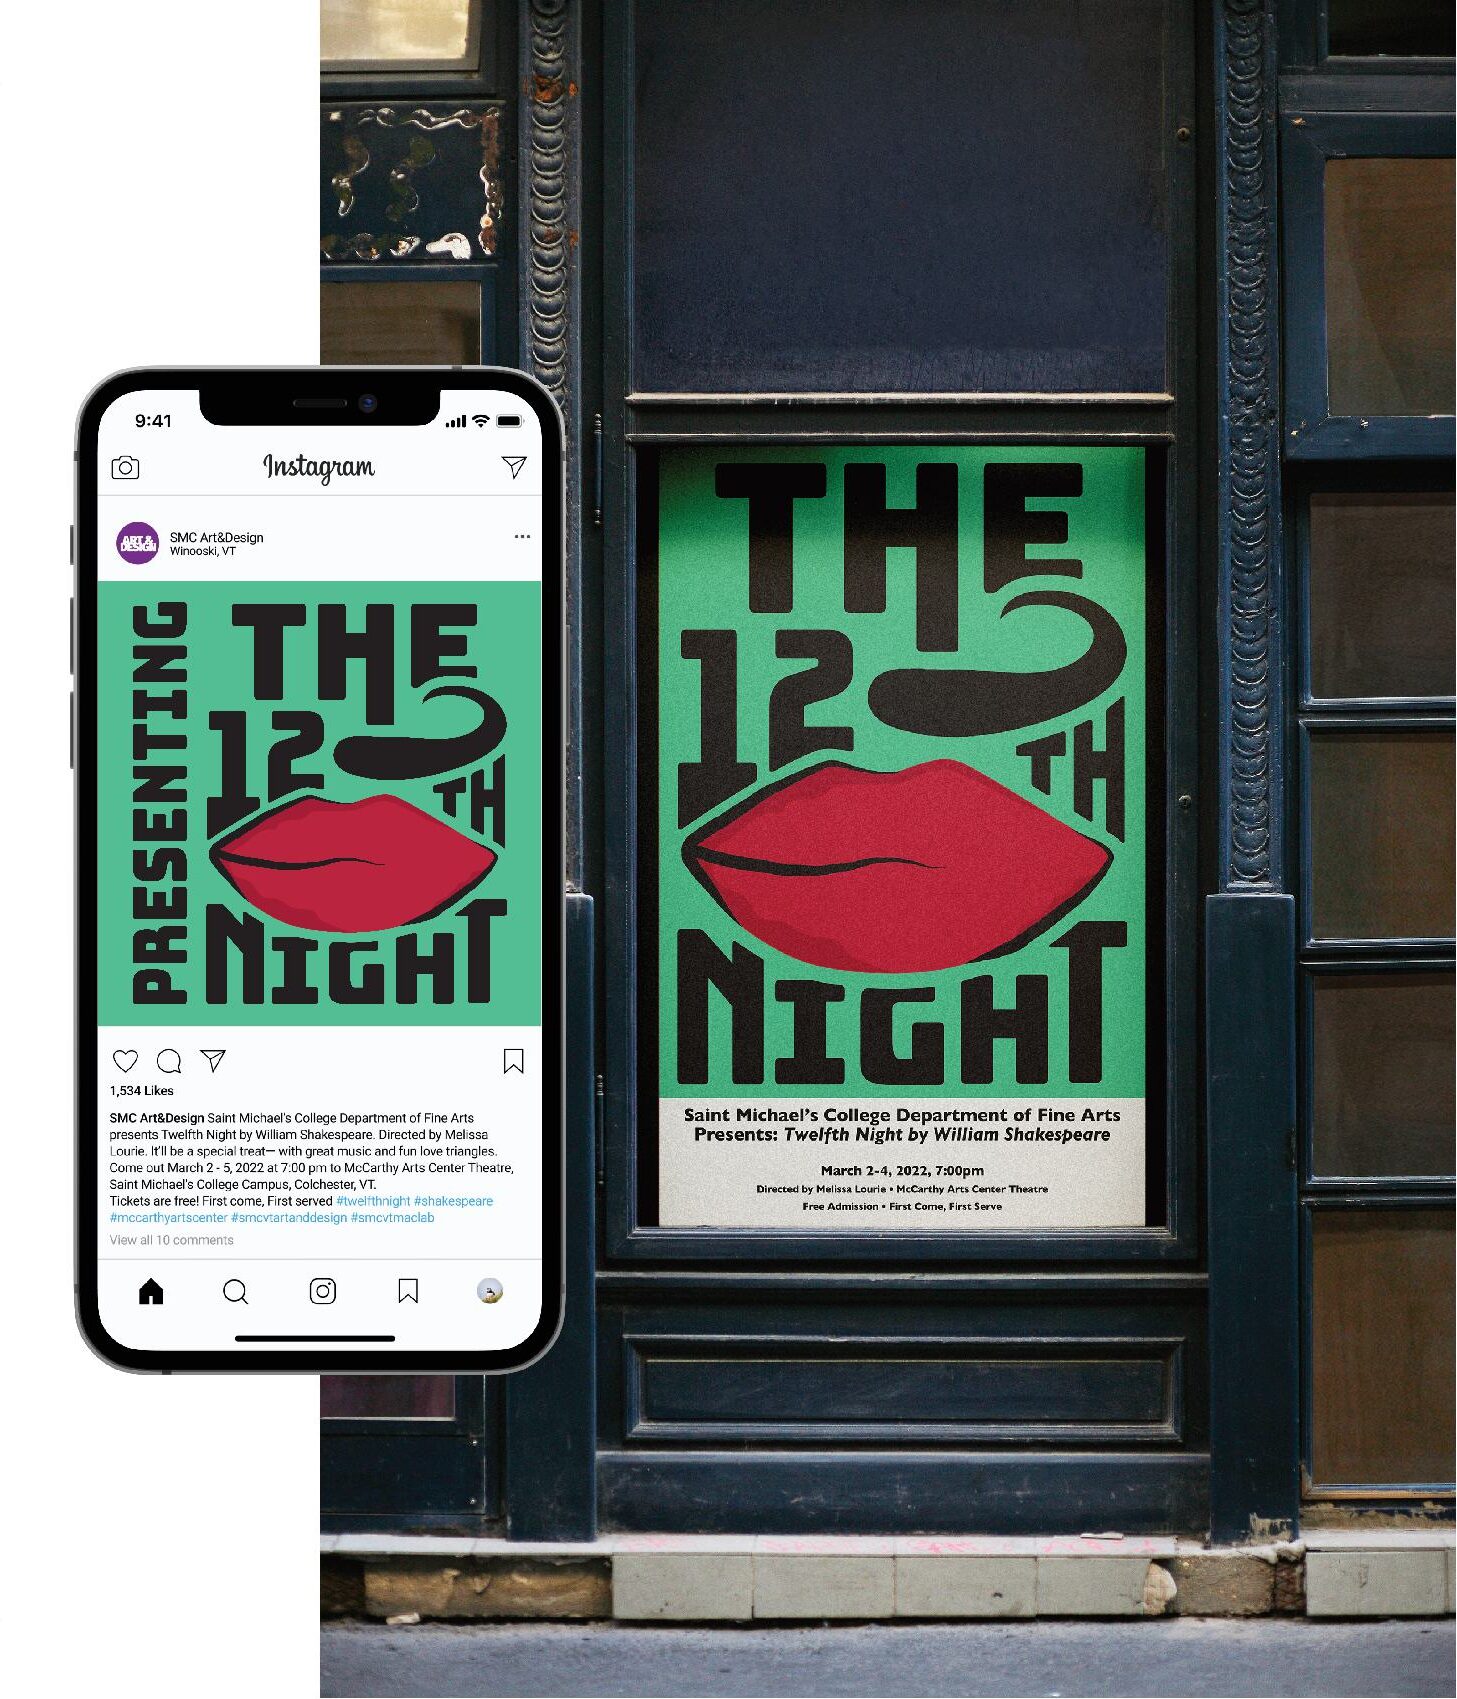 A poster and instagram post promoting the 12th night play. It has a green background and large red lips in the middle of the title of the play.